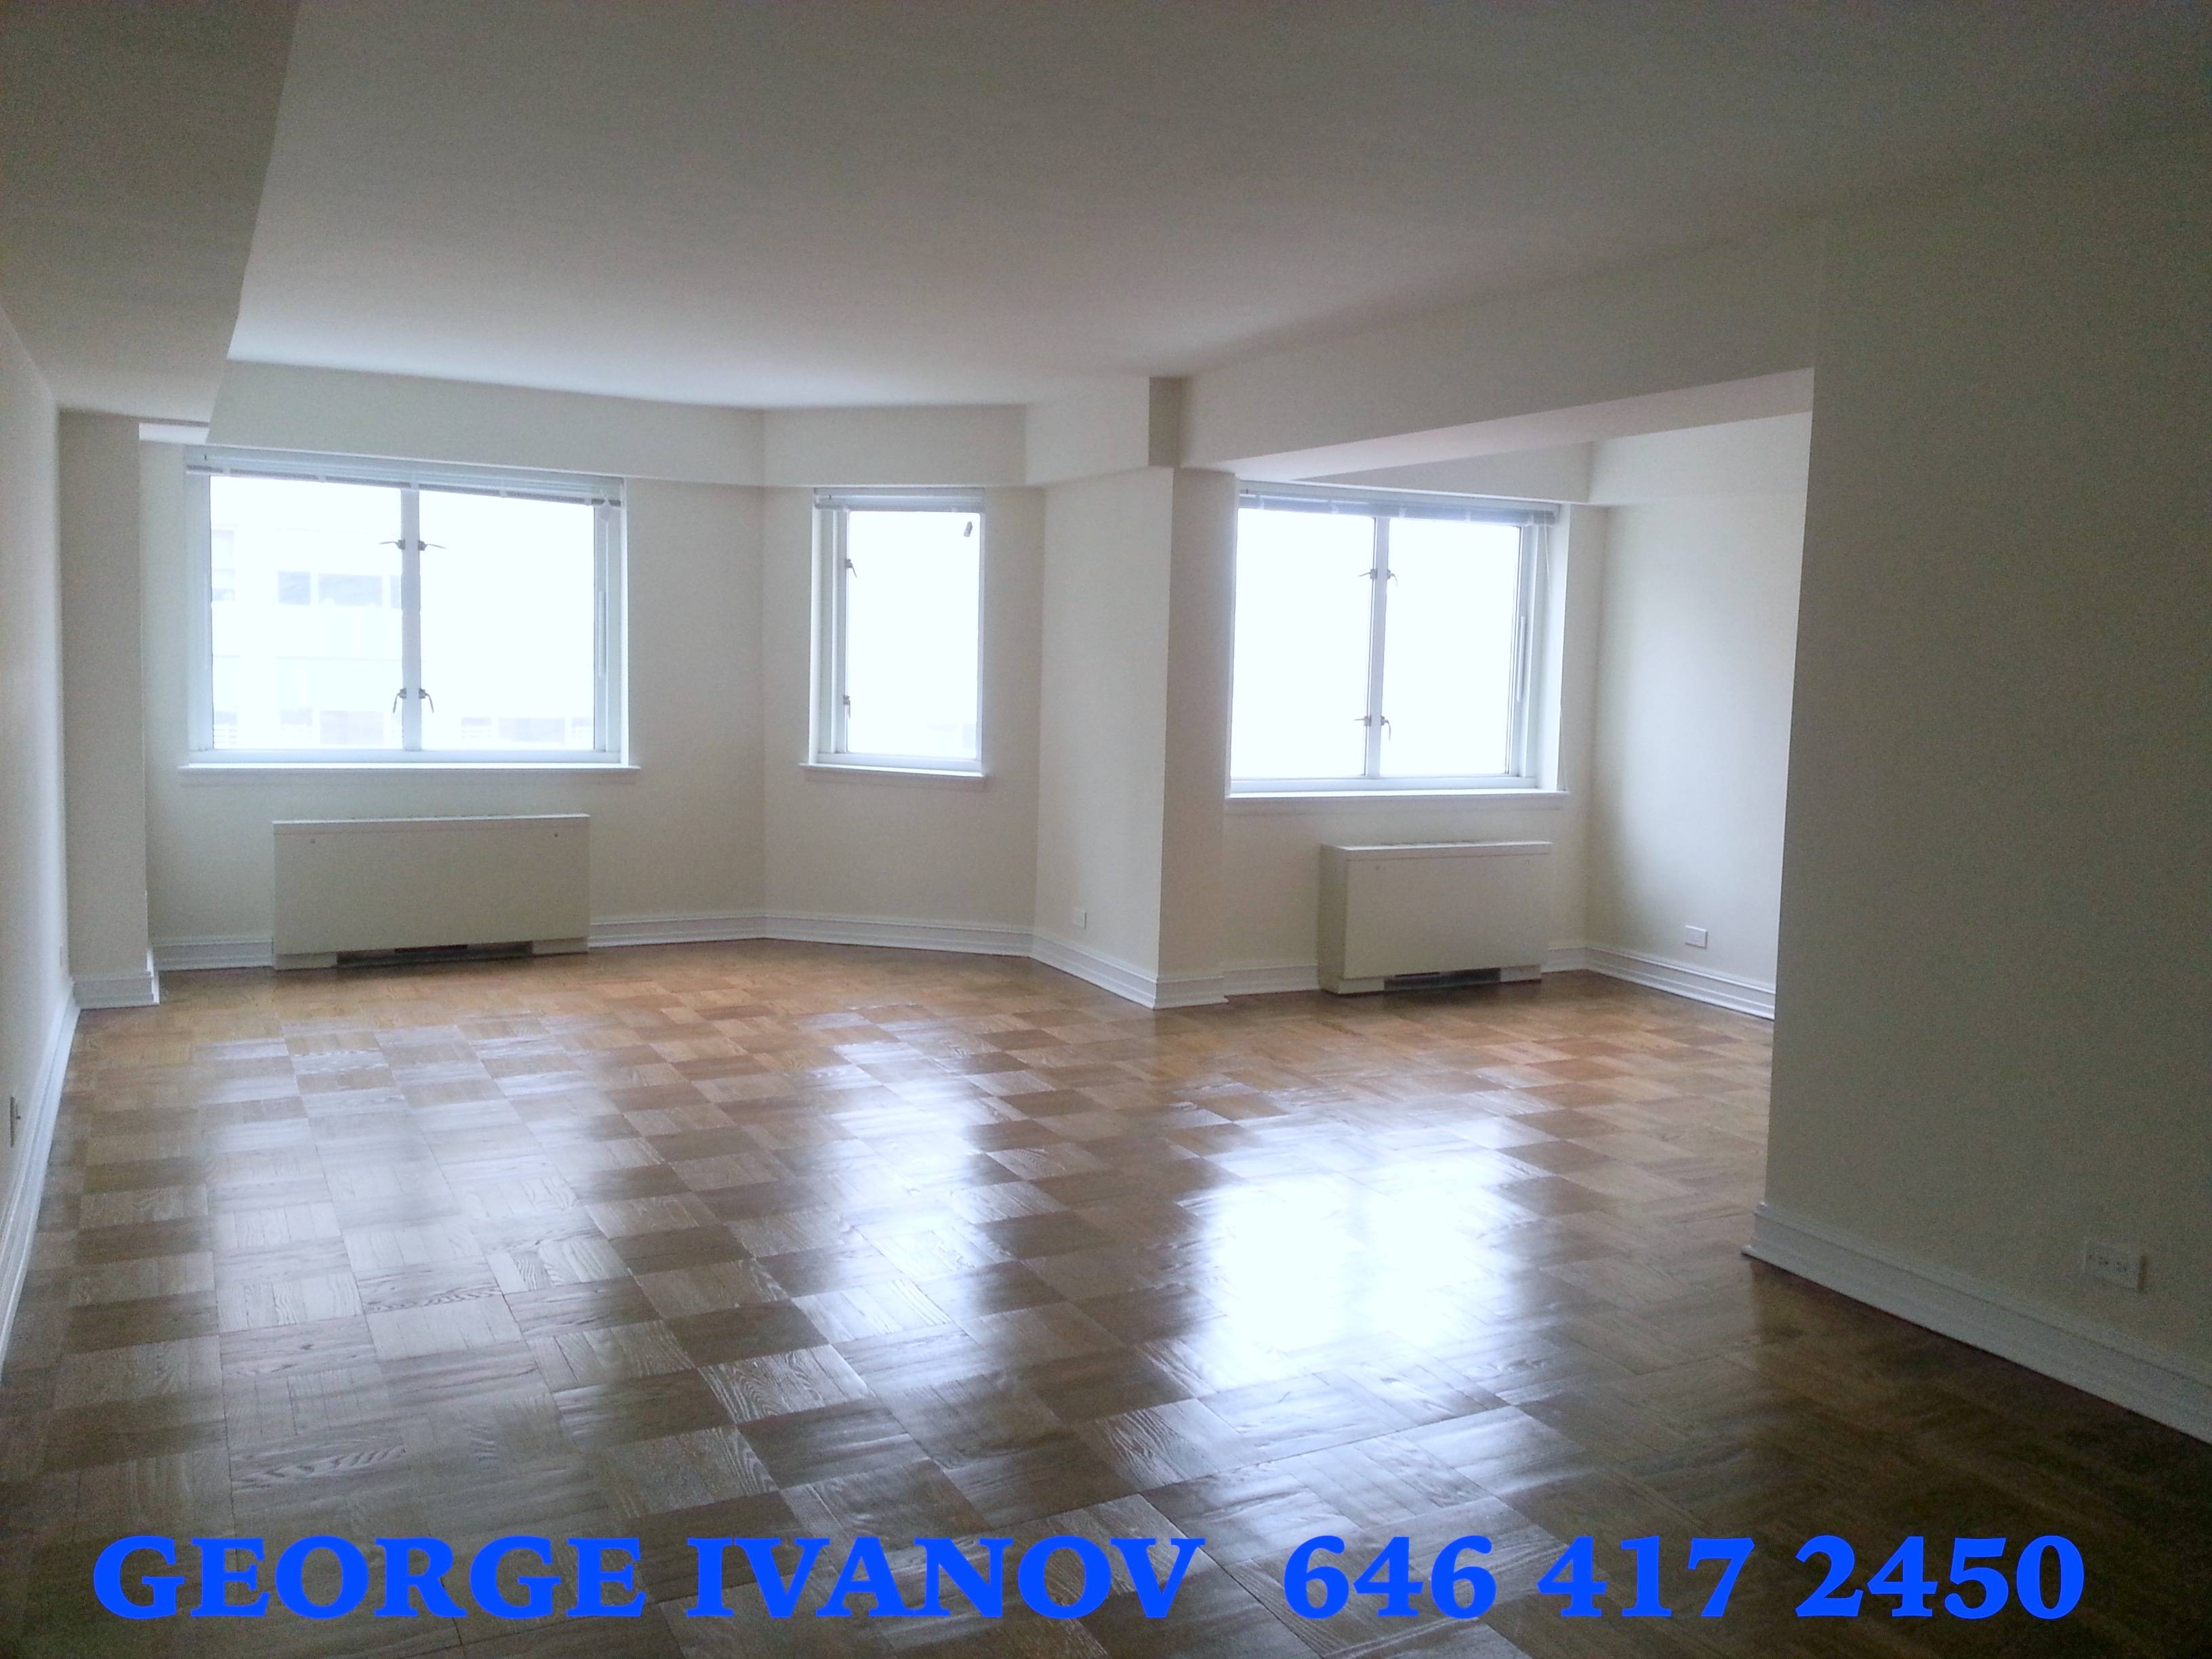 ****NO FEE ! Luxury 3 bed /2 bath Residence . Super Location on UES at 3rd Avenue 70th Street. 24 Hr Doorman.